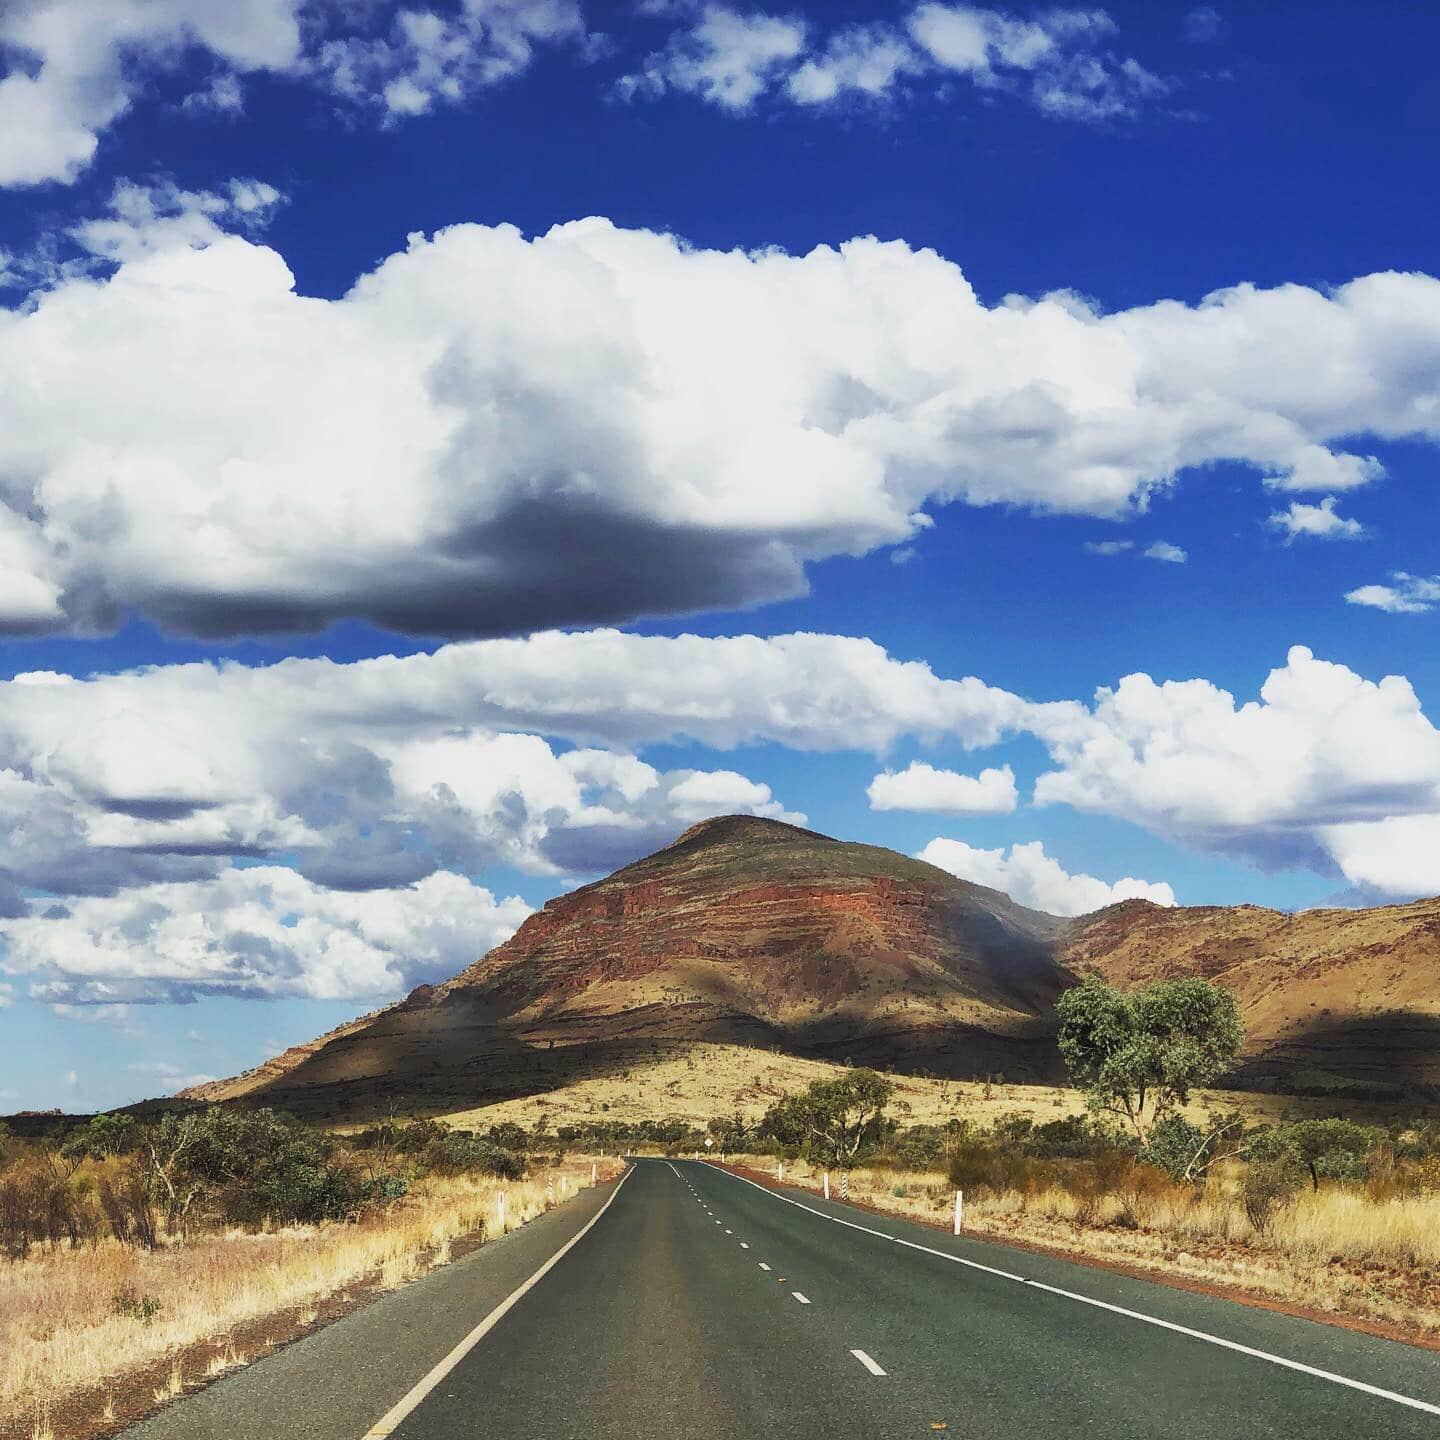 On the road to Karijini National Park